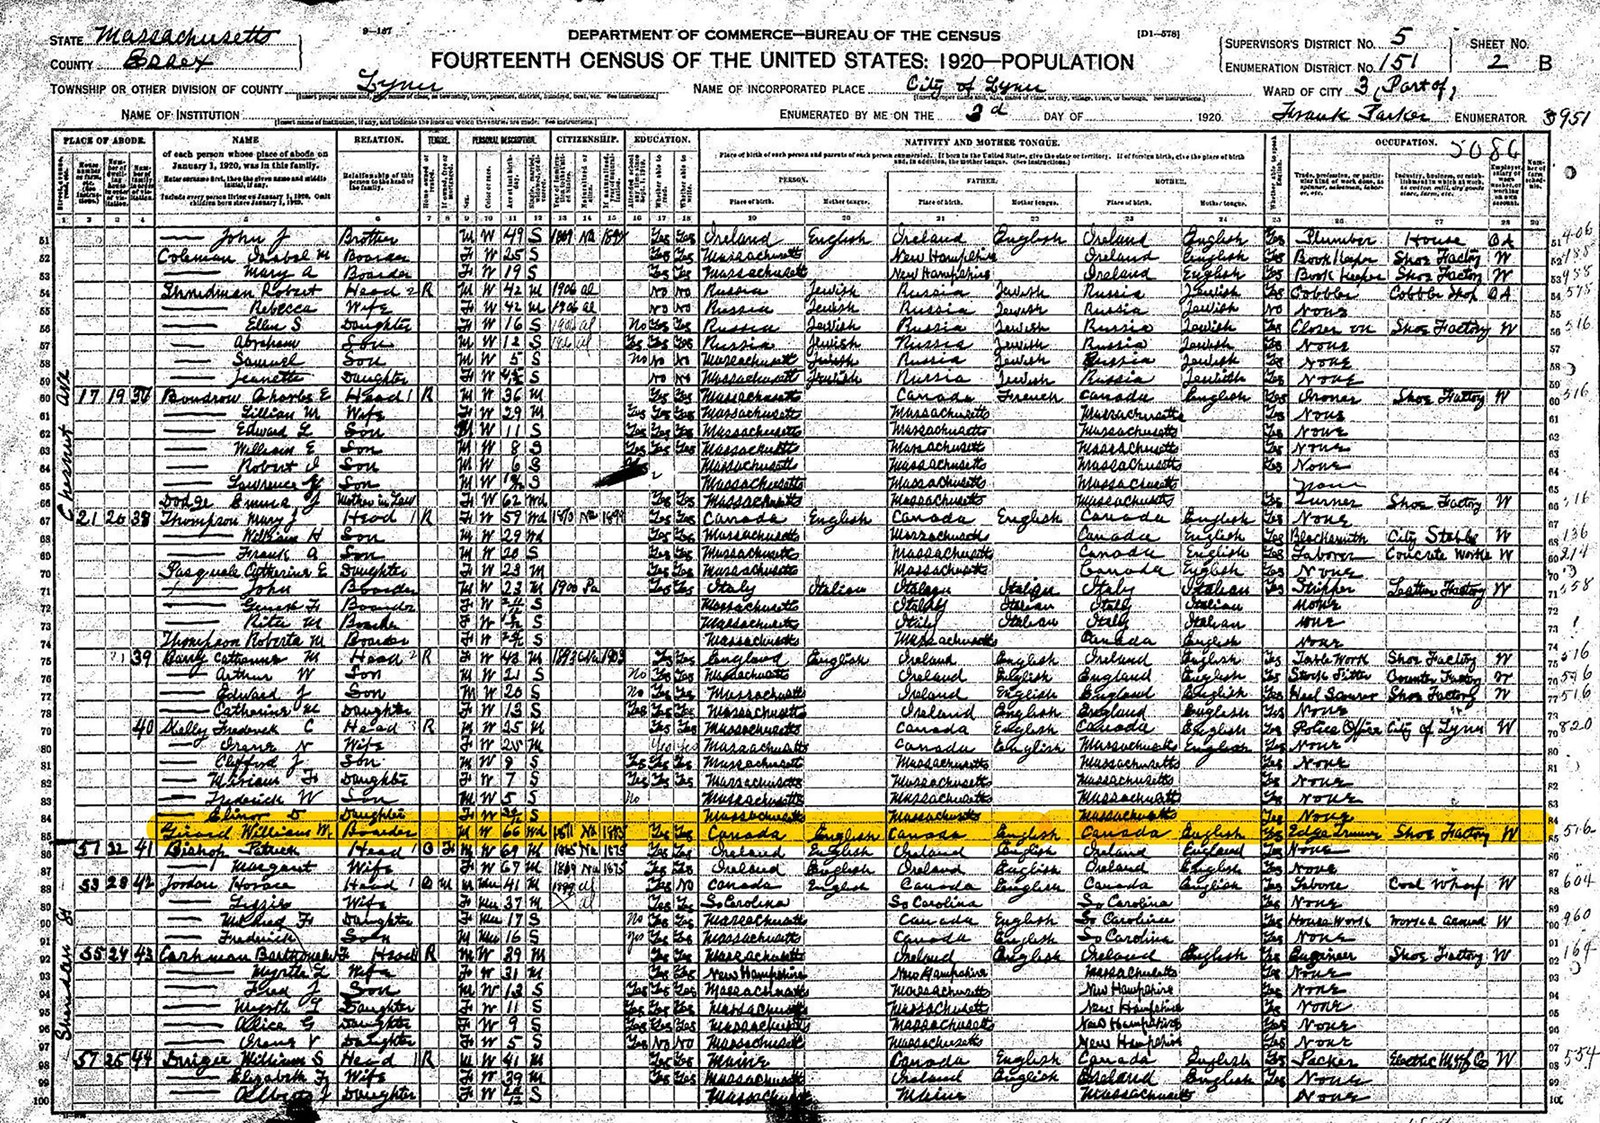 1920 Lynn, MA census record showing William W. Girard living with Kelley family